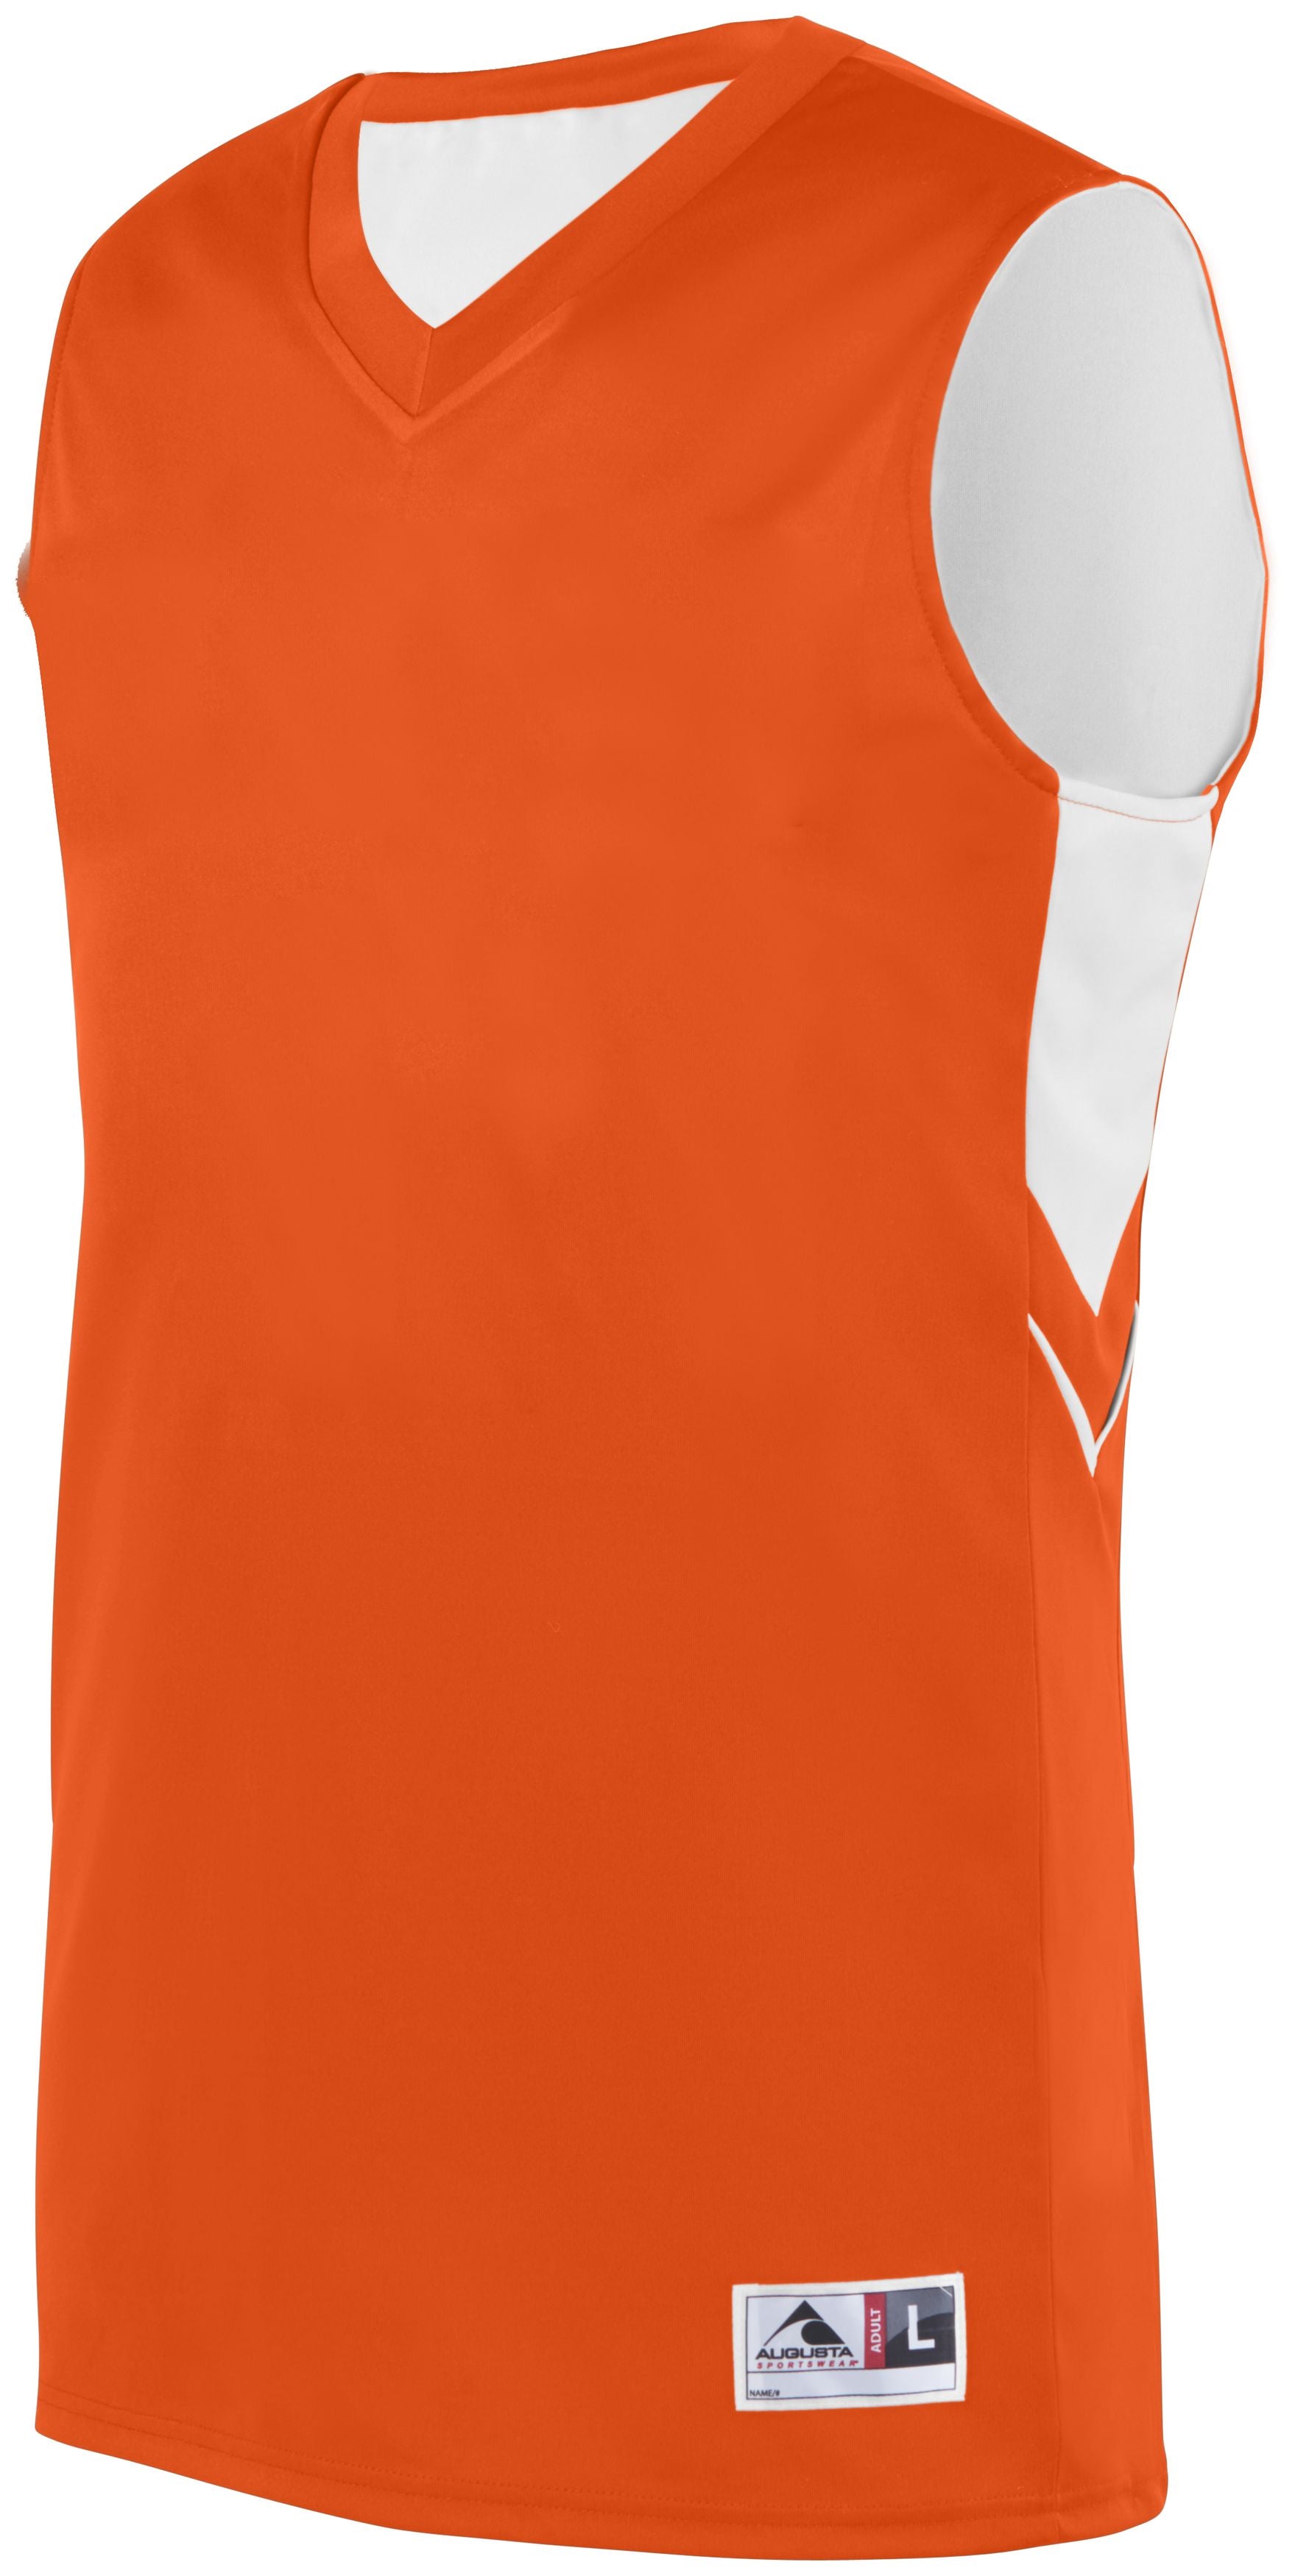 Augusta Sportswear Alley-Oop Reversible Jersey in Orange/White  -Part of the Adult, Adult-Jersey, Augusta-Products, Basketball, Shirts, All-Sports, All-Sports-1 product lines at KanaleyCreations.com